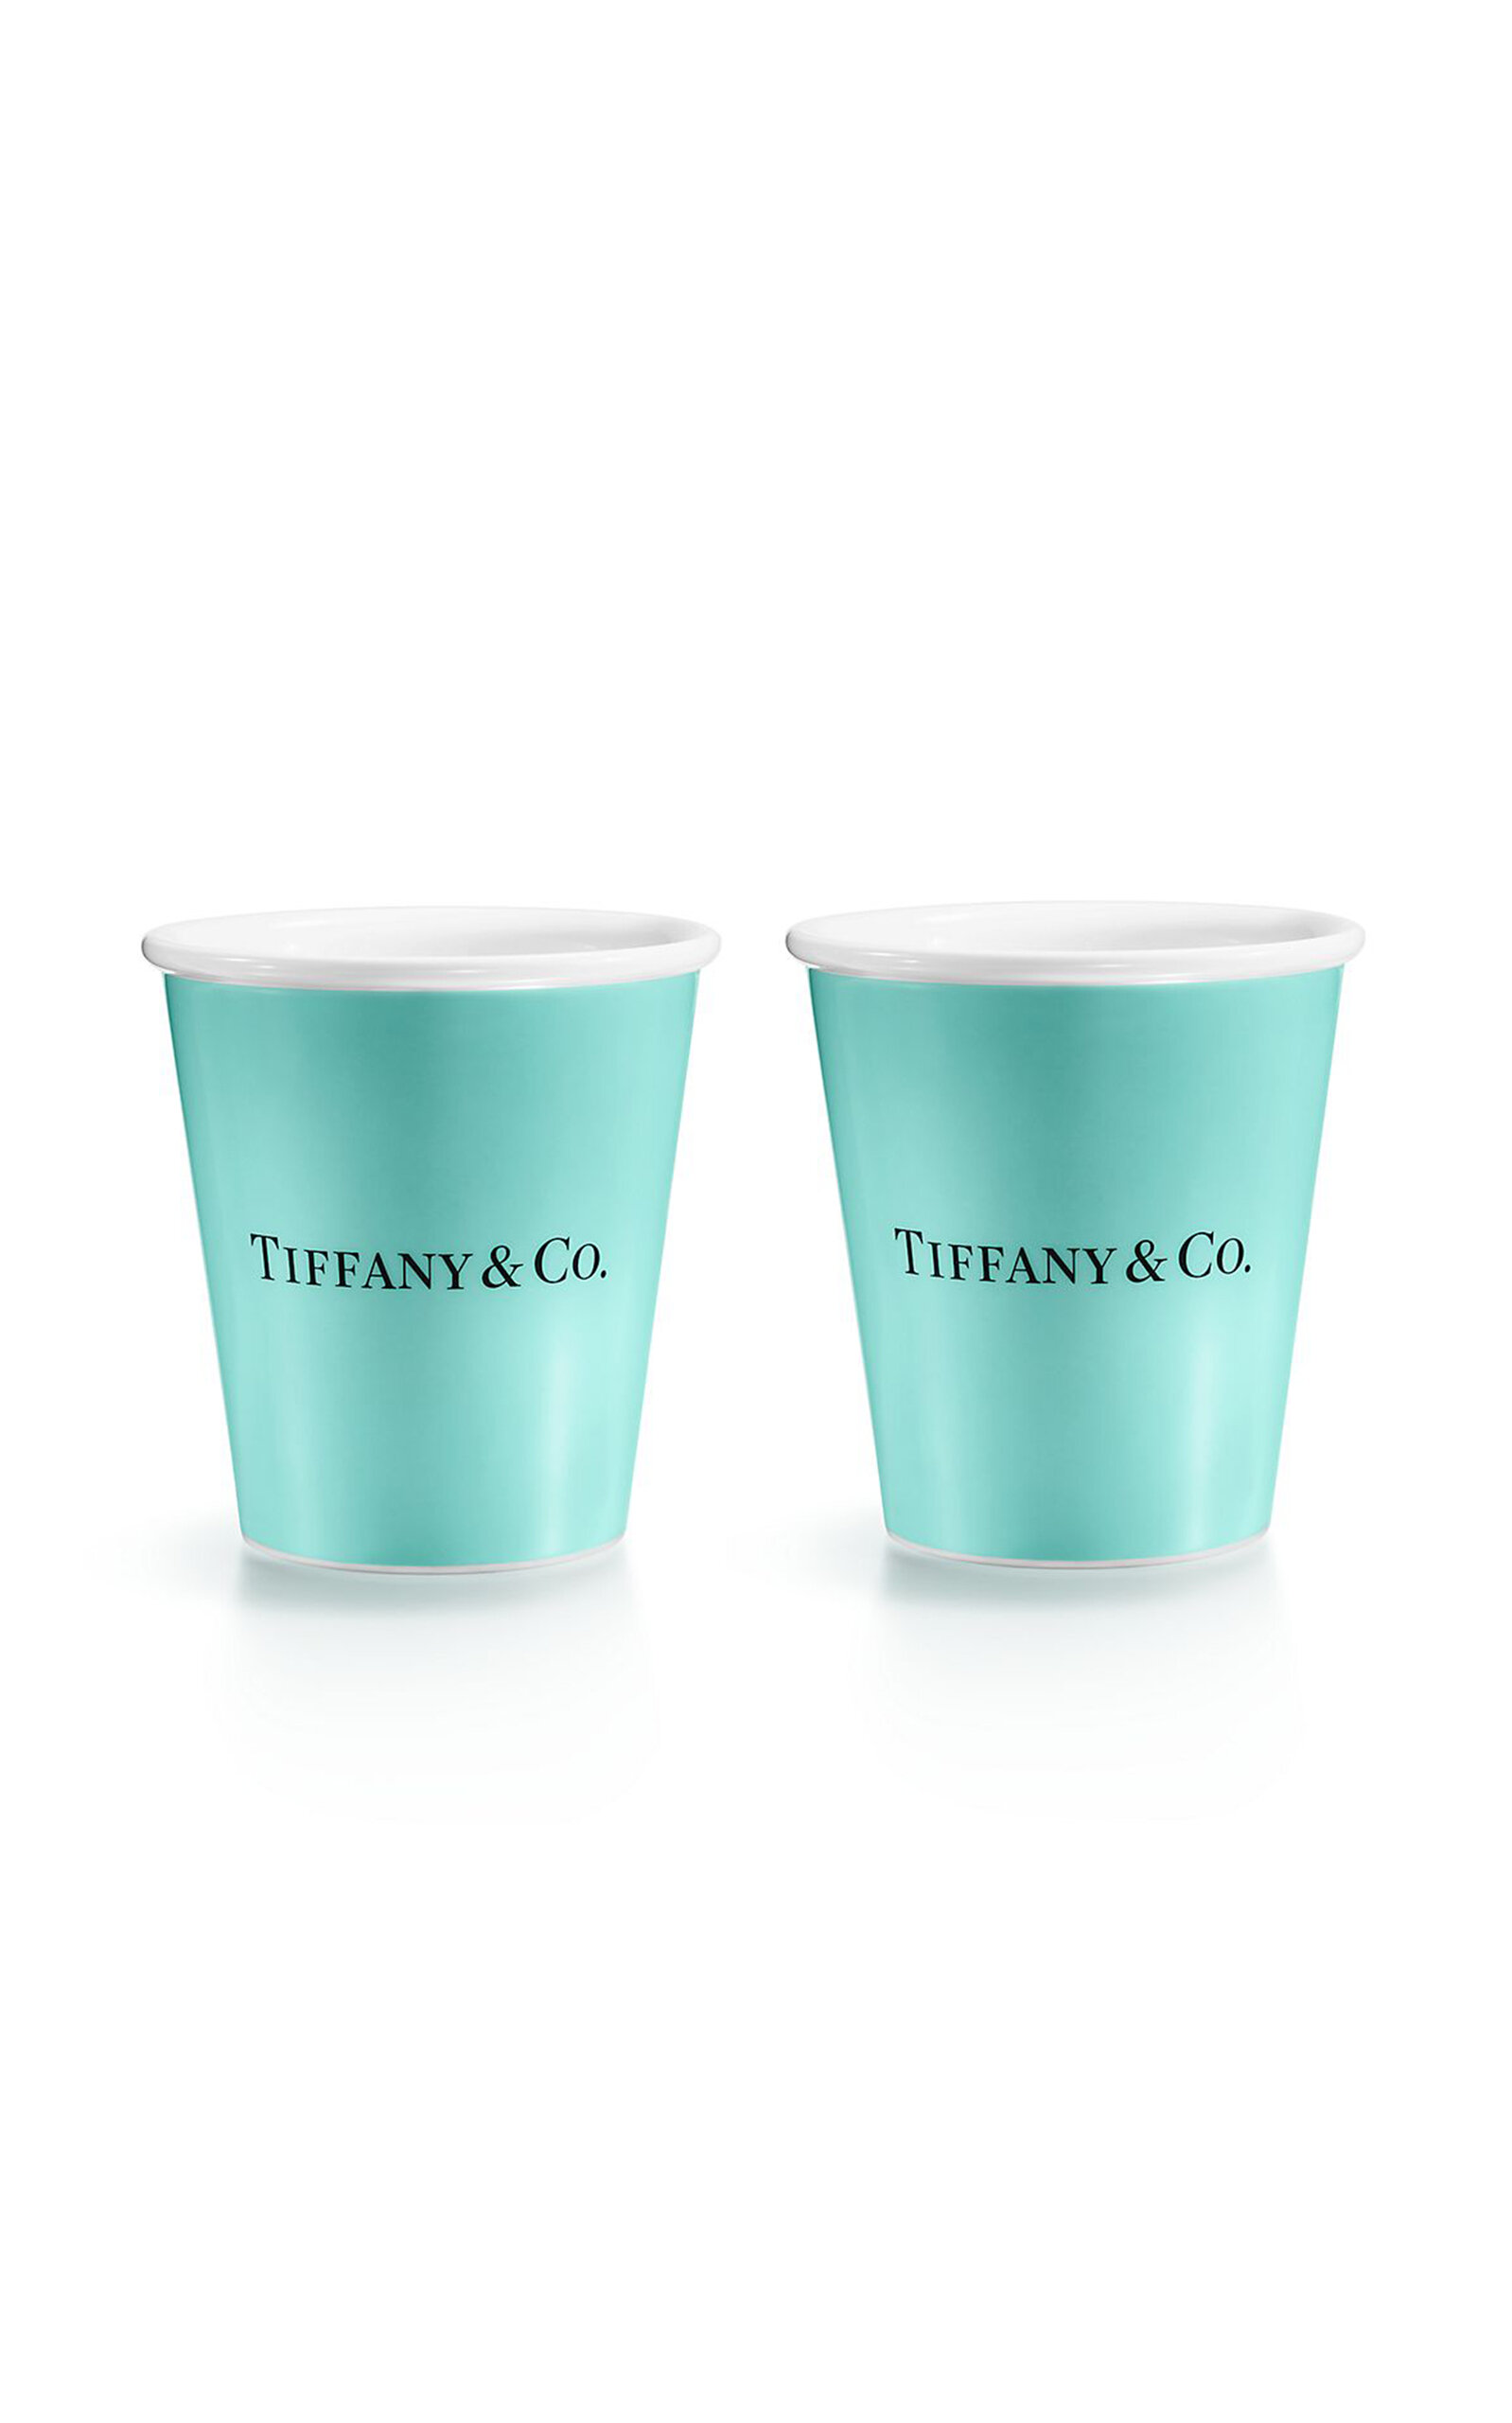 Tiffany & Co Set-of-two Bone China Coffee Cups In Blue